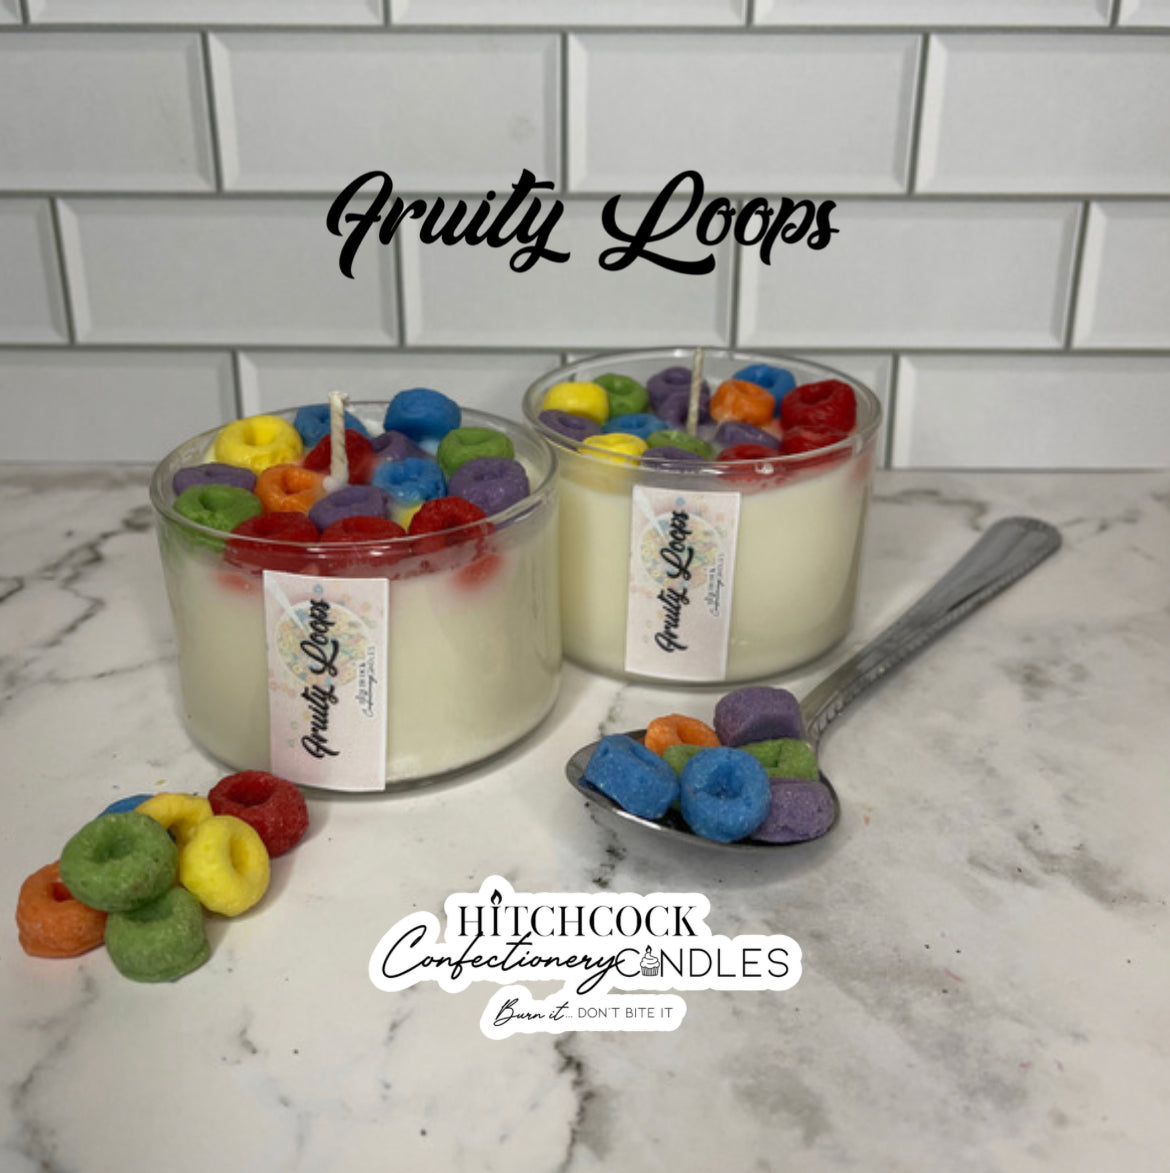 Mini Cereal Candles